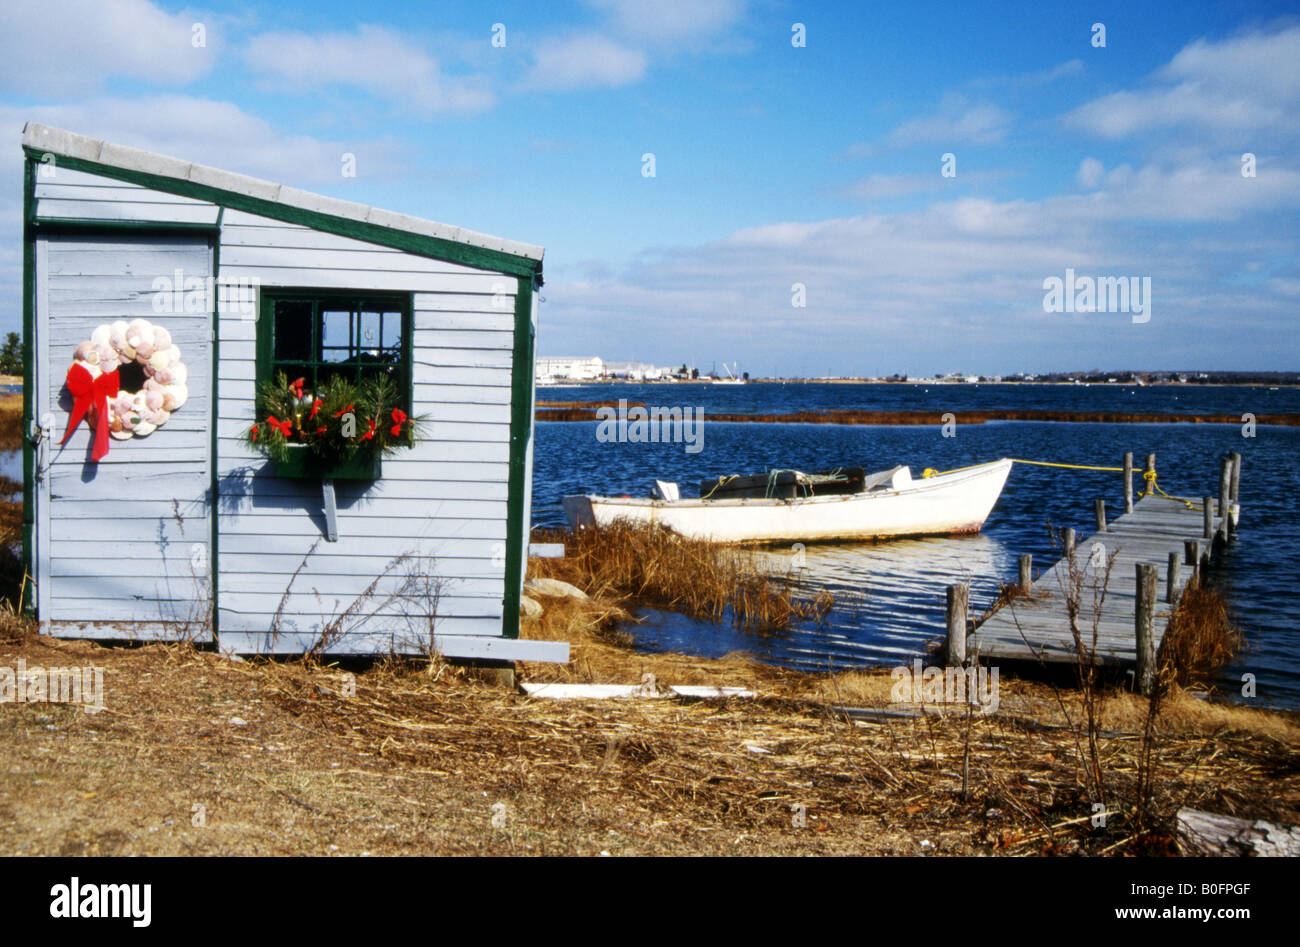 Small lakeside summer beach house with boat tied up outside,near Edgartown,Martha's Vineyard,Massachussetts,U.S.A Stock Photo